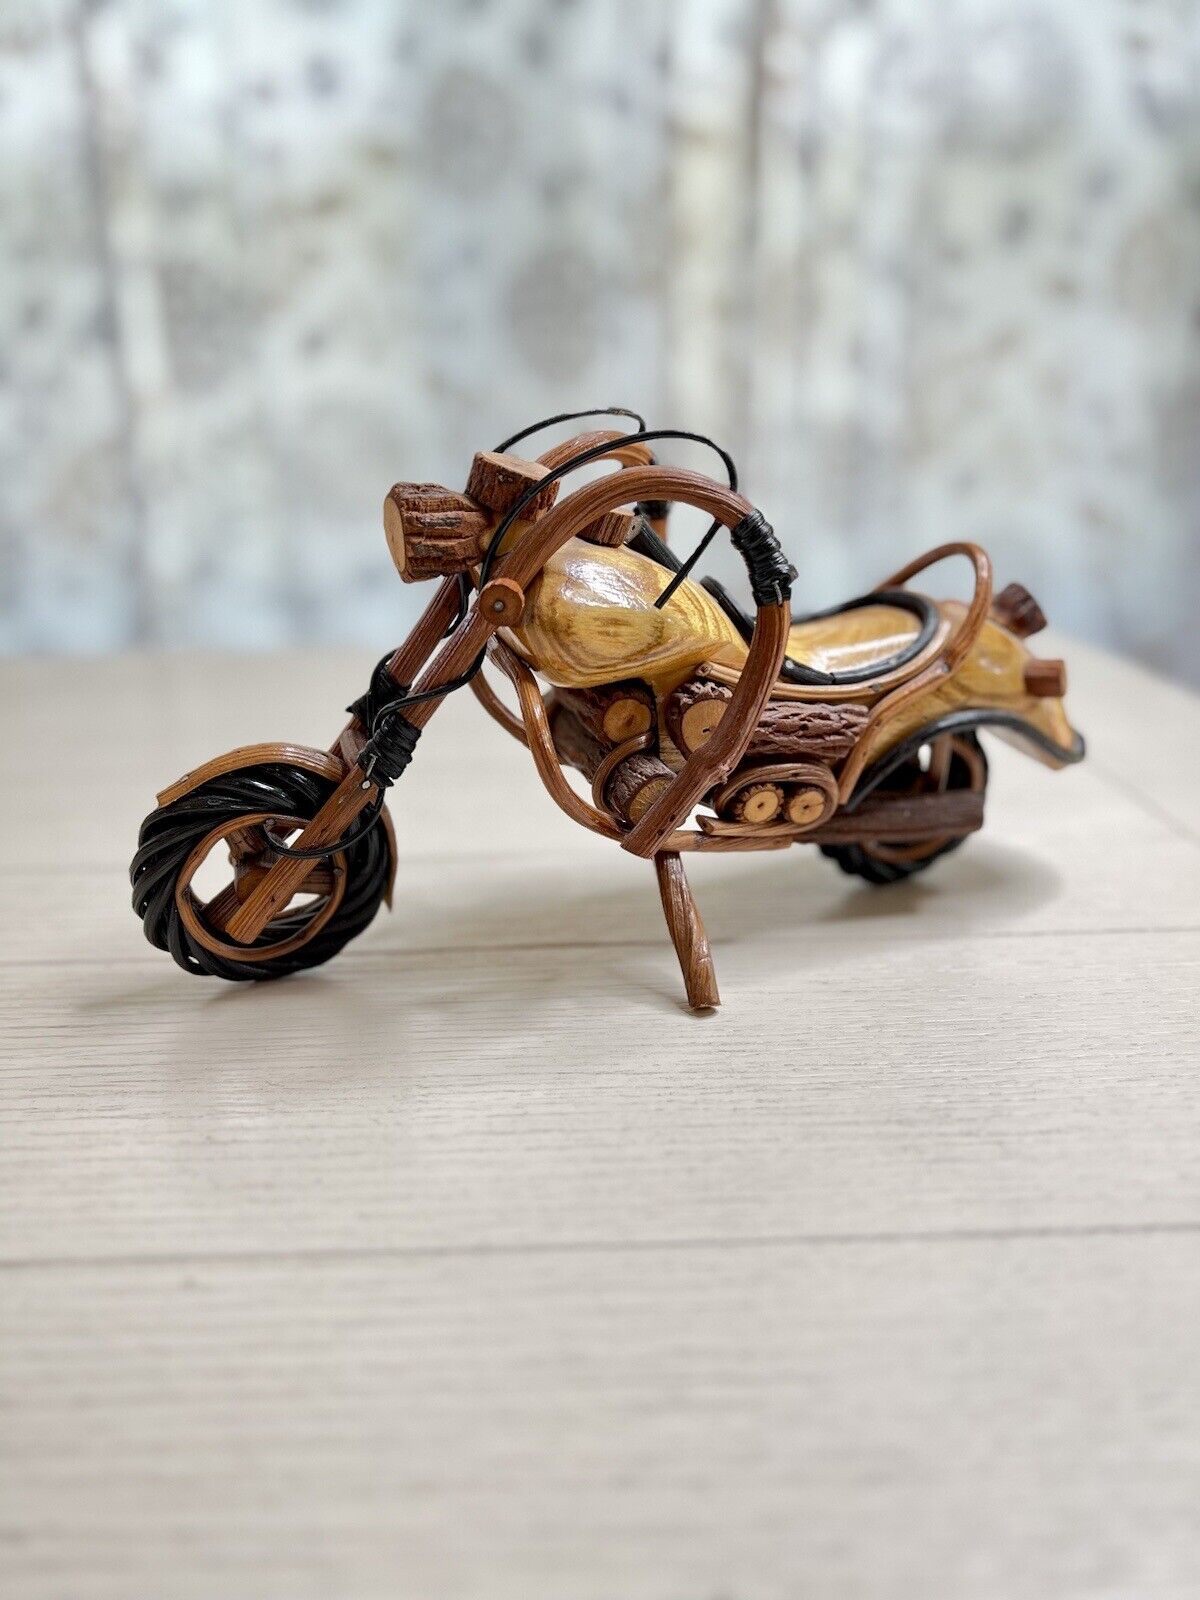 Unique Handmade Motorcycle/ Chopper Made Of Twigs And Wood